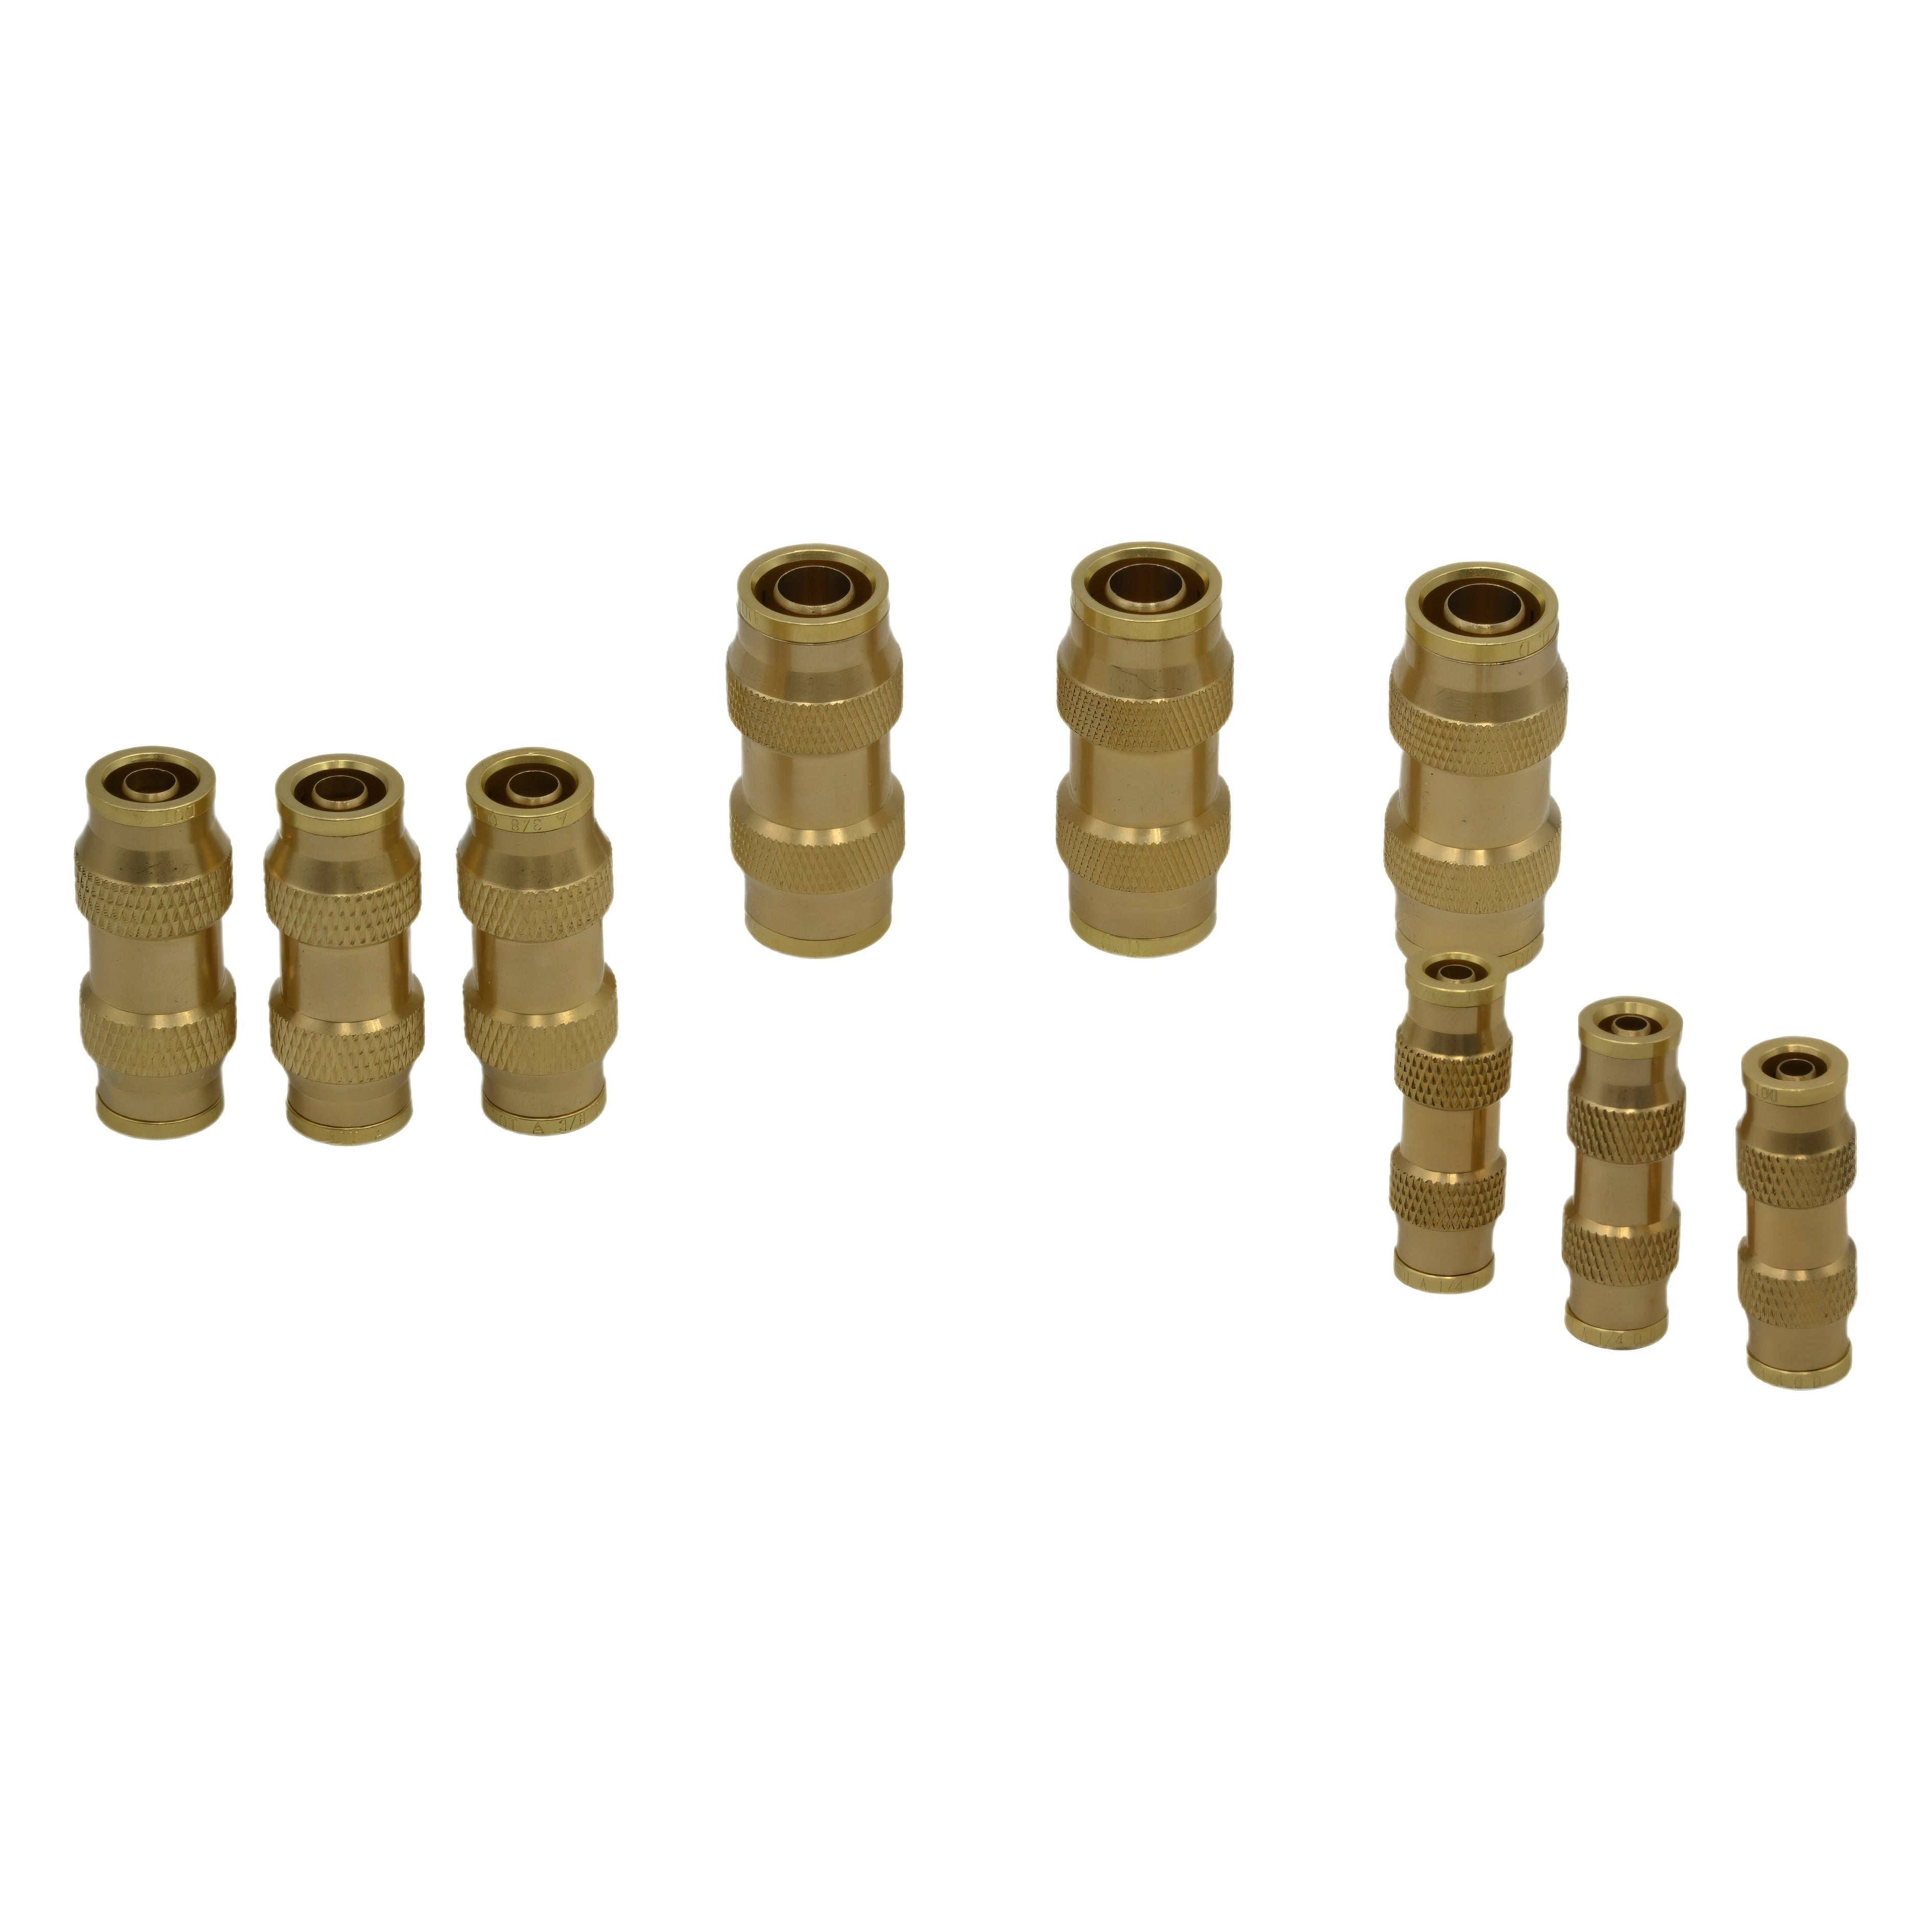 9 Piece  DOT Straight Brass Push in Hose Connect Grab Kit Assortment